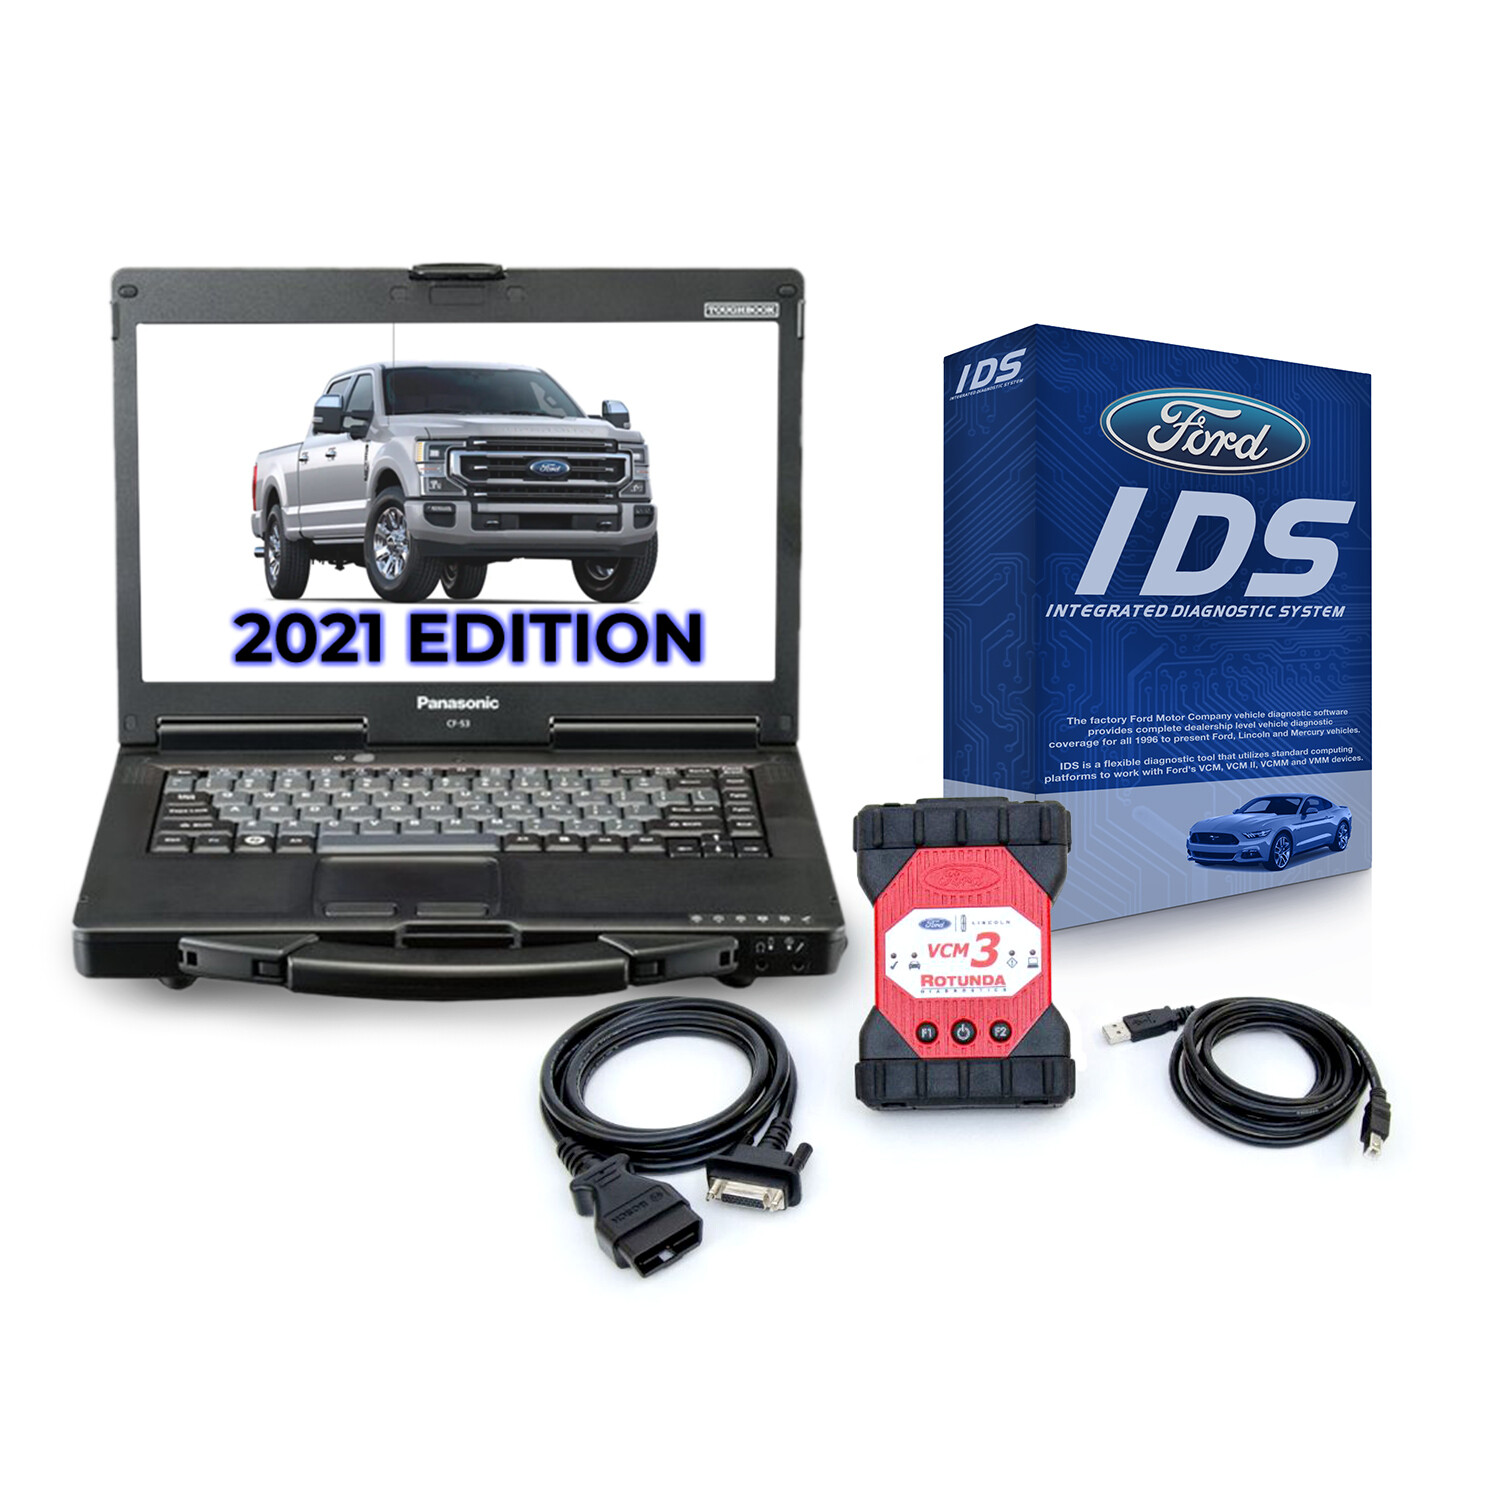 Ford IDS Software, Full Annual Subscription with VCM 3 Ford Tool with Toughbook Dealer Package